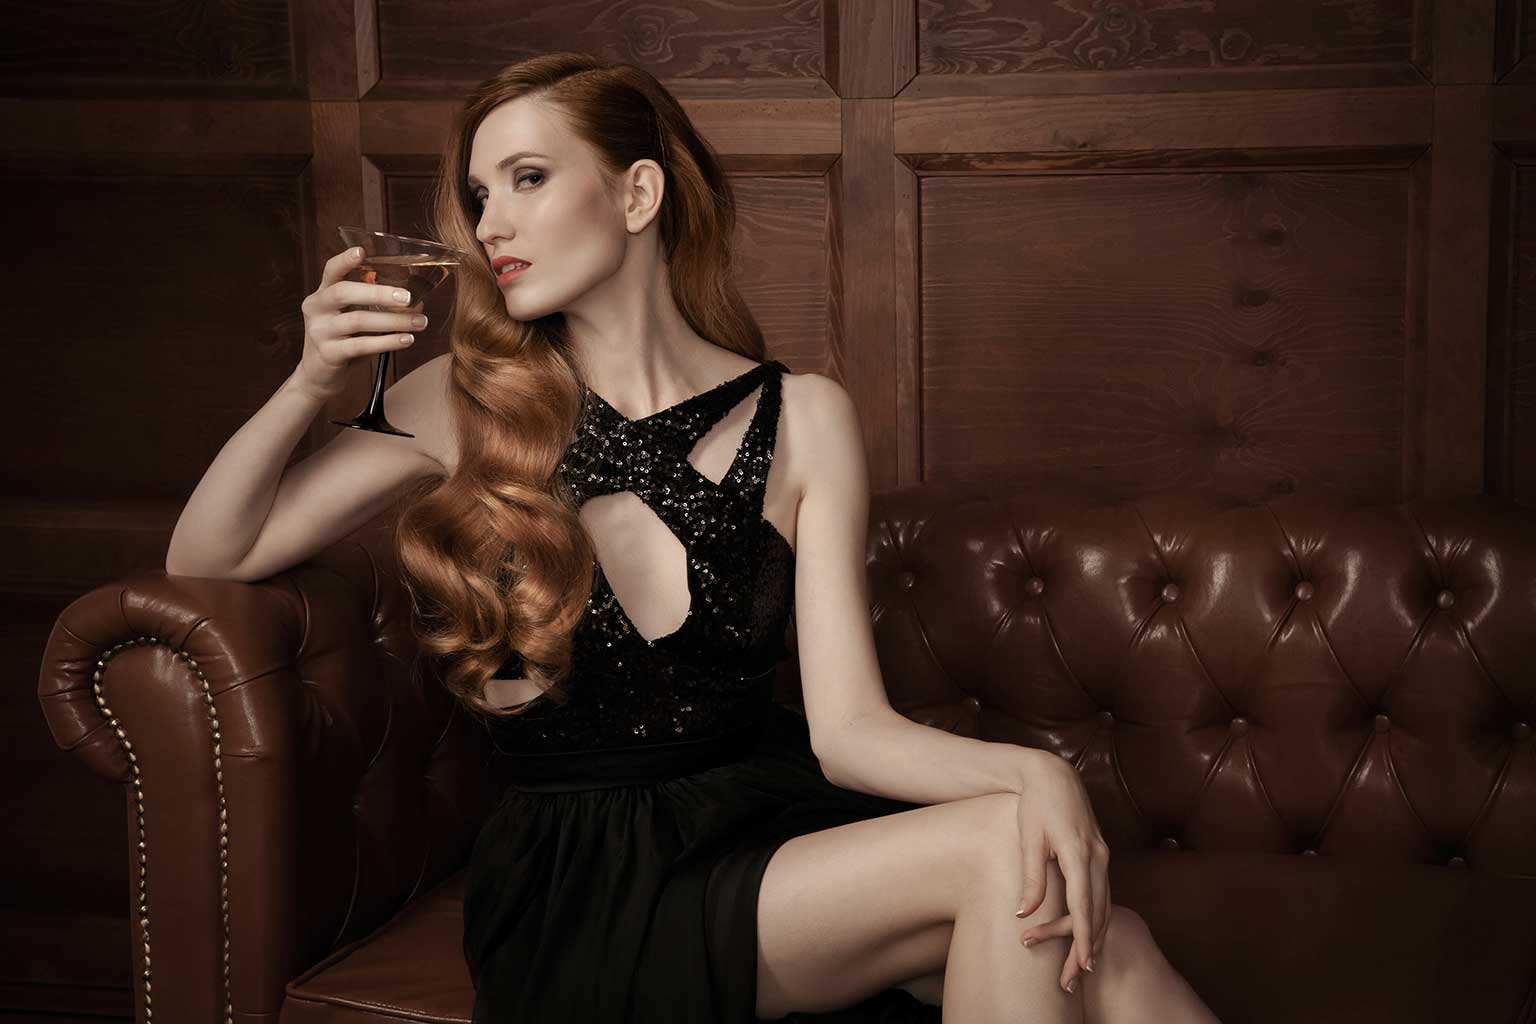 Red Headed Woman Sipping a Martini Glass on a Leather Couch